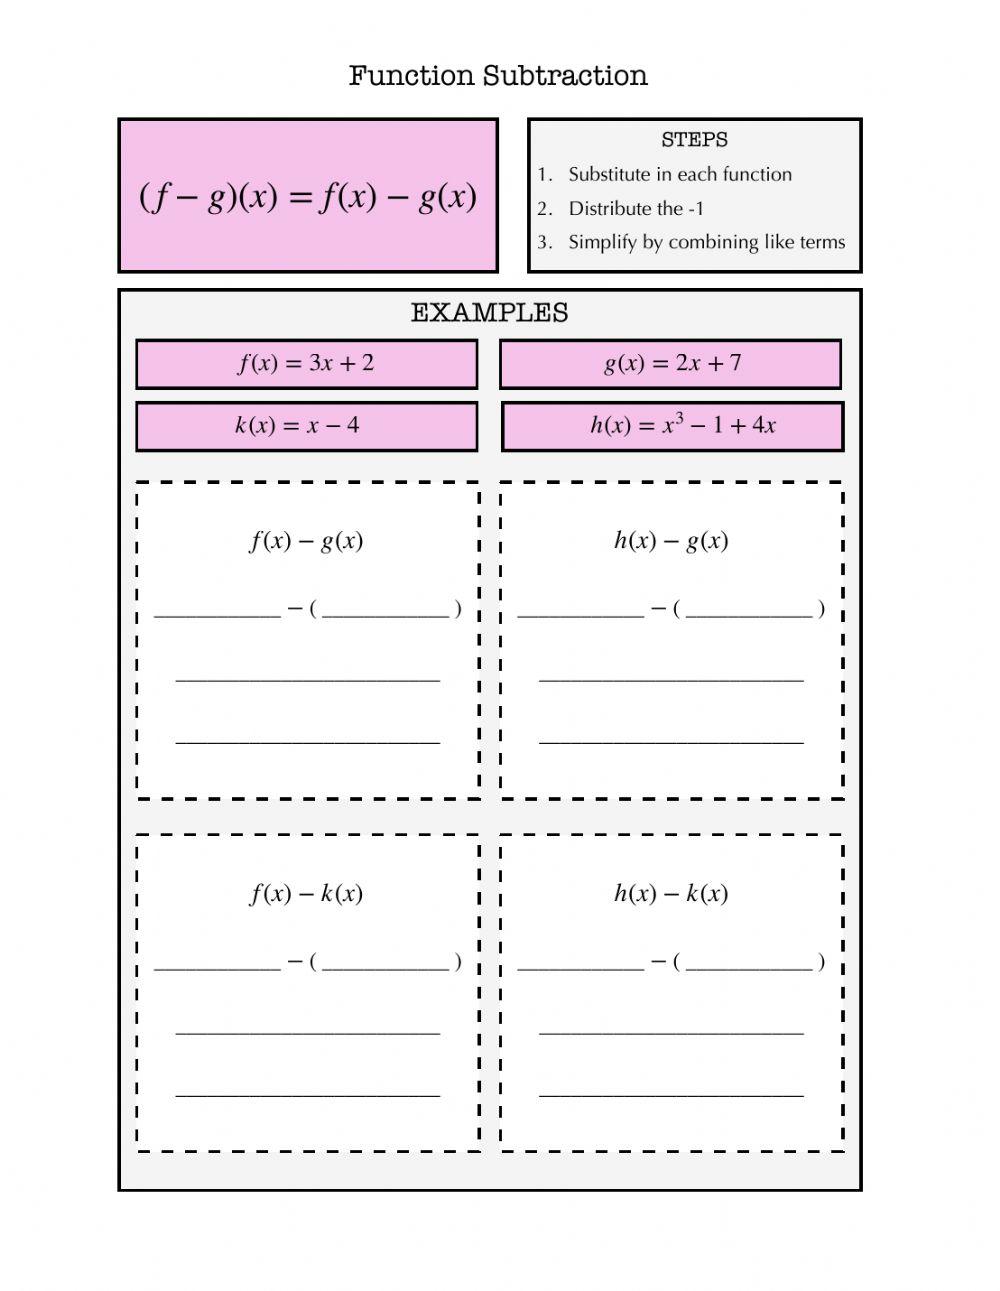 Function Subtraction Notes